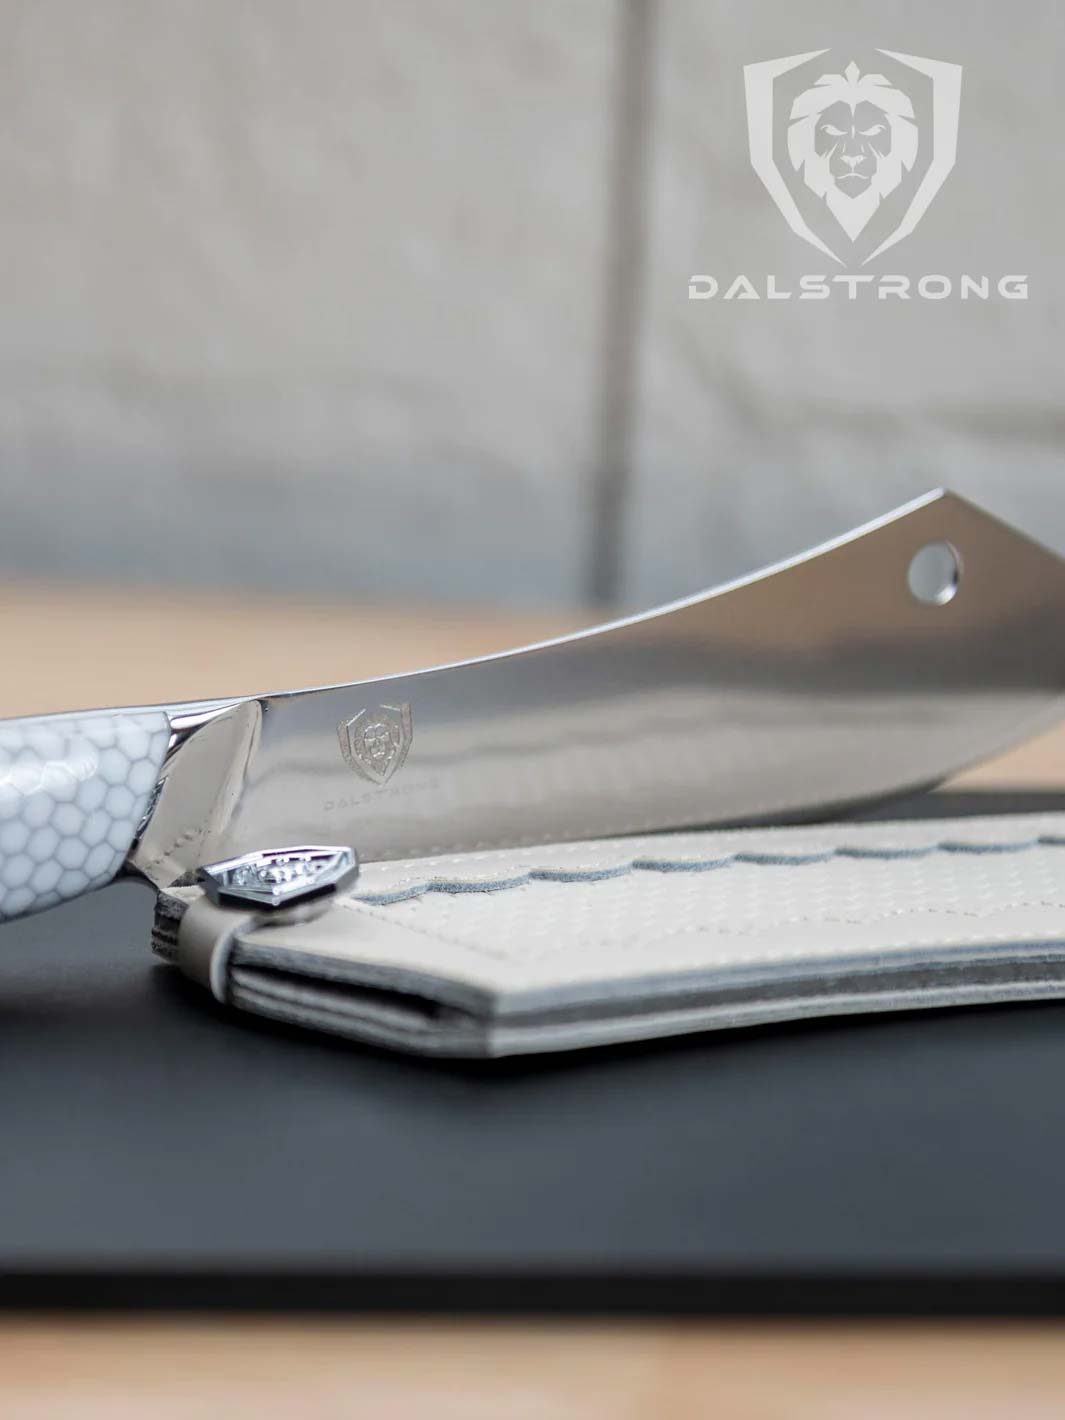 Dalstrong frost fire series 8 inch crixus cleaver knife with white honeycomb handle beside it's sheath on a black board.